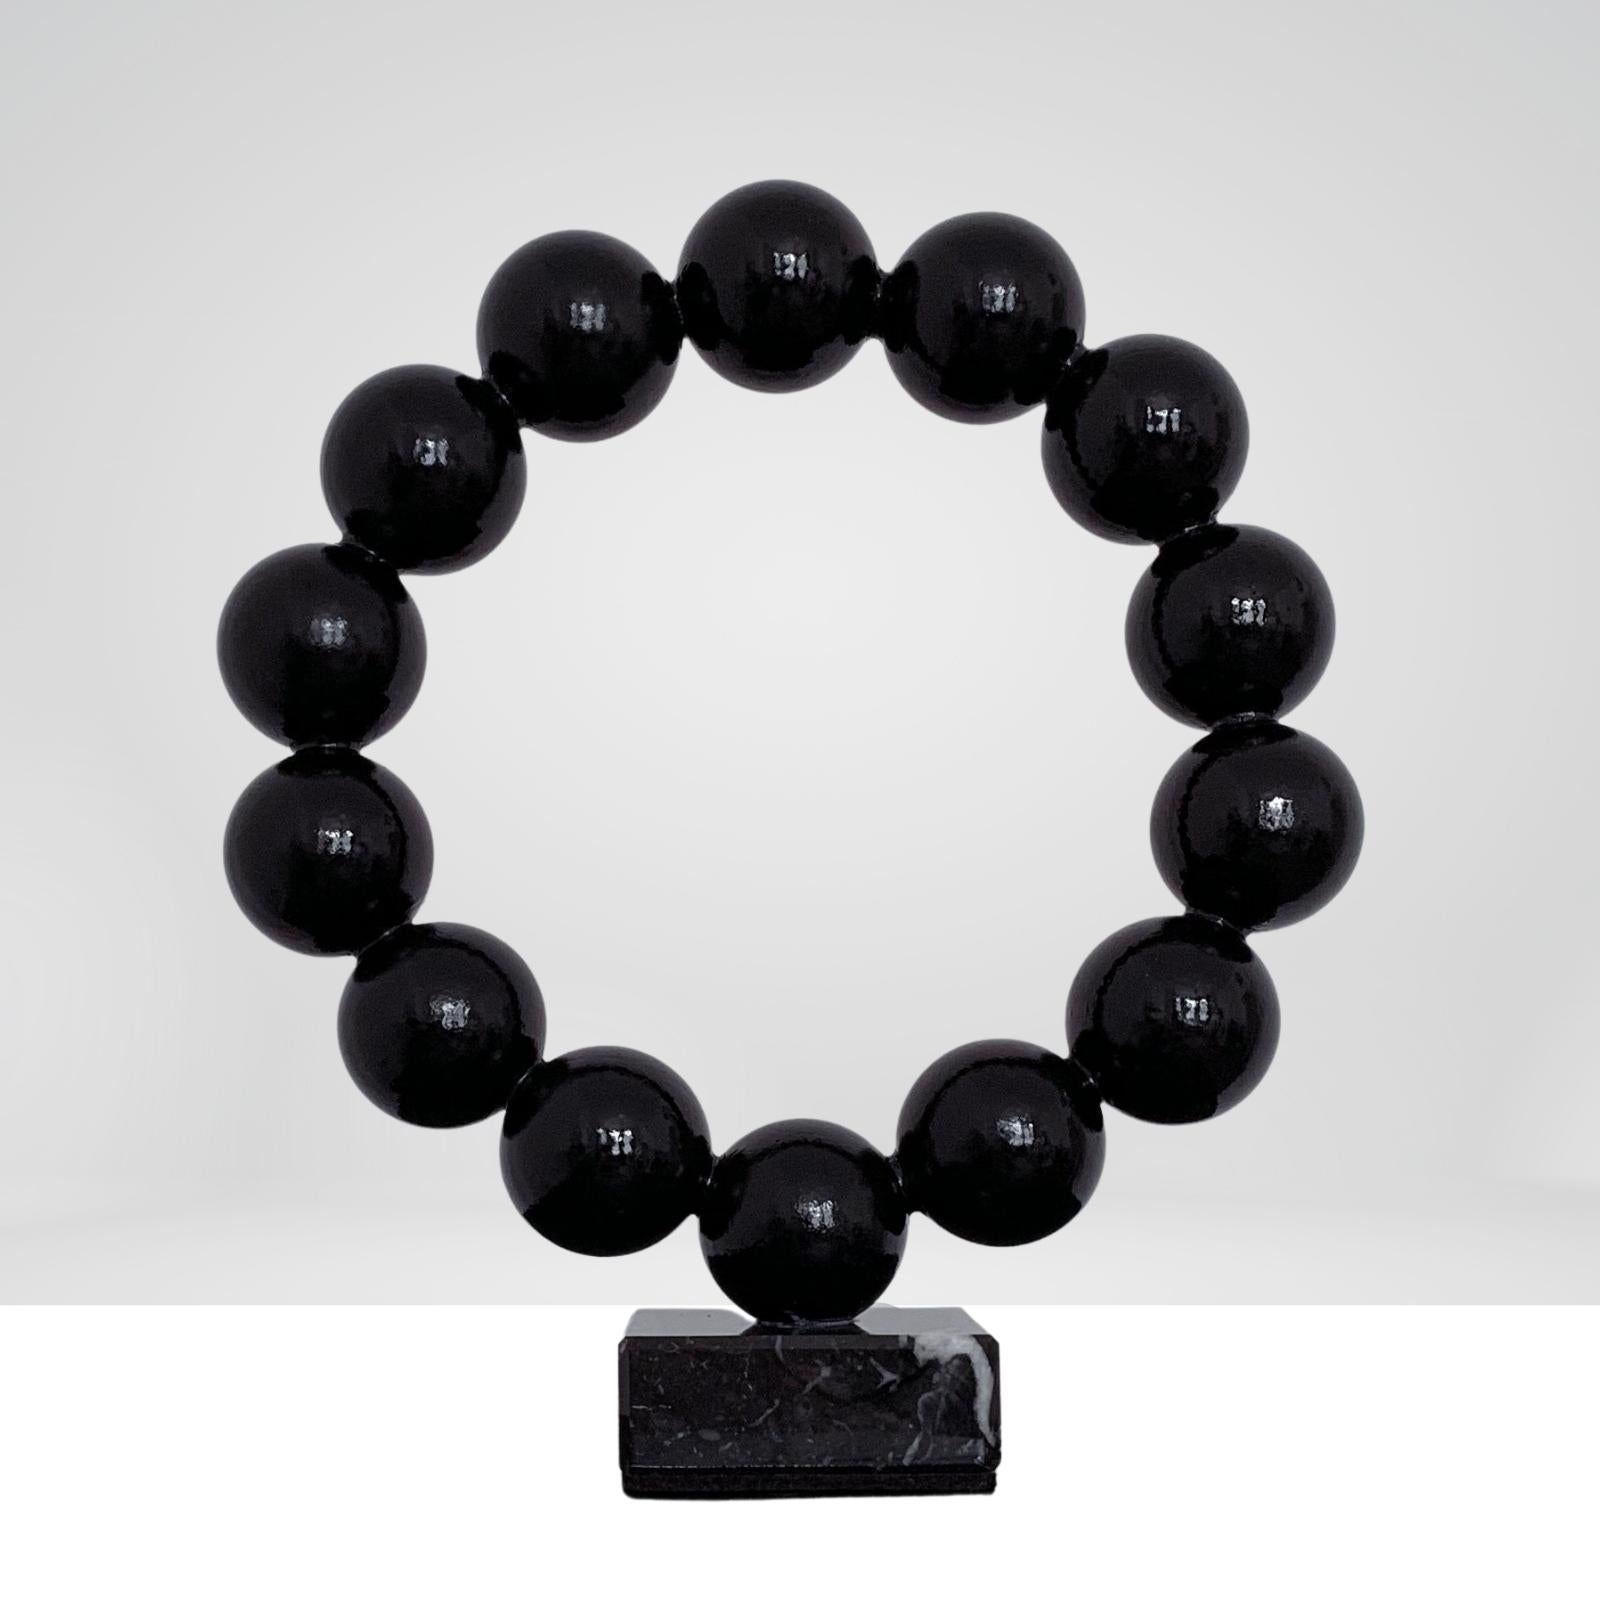 Made in England, 2021.

Black. Minimalistic. Abstract. Spheres: from molecules to planets. Look around: mono sphere or billions of small combinations of spheres - this all is our world.

Please, note, that real product colours may vary slightly from